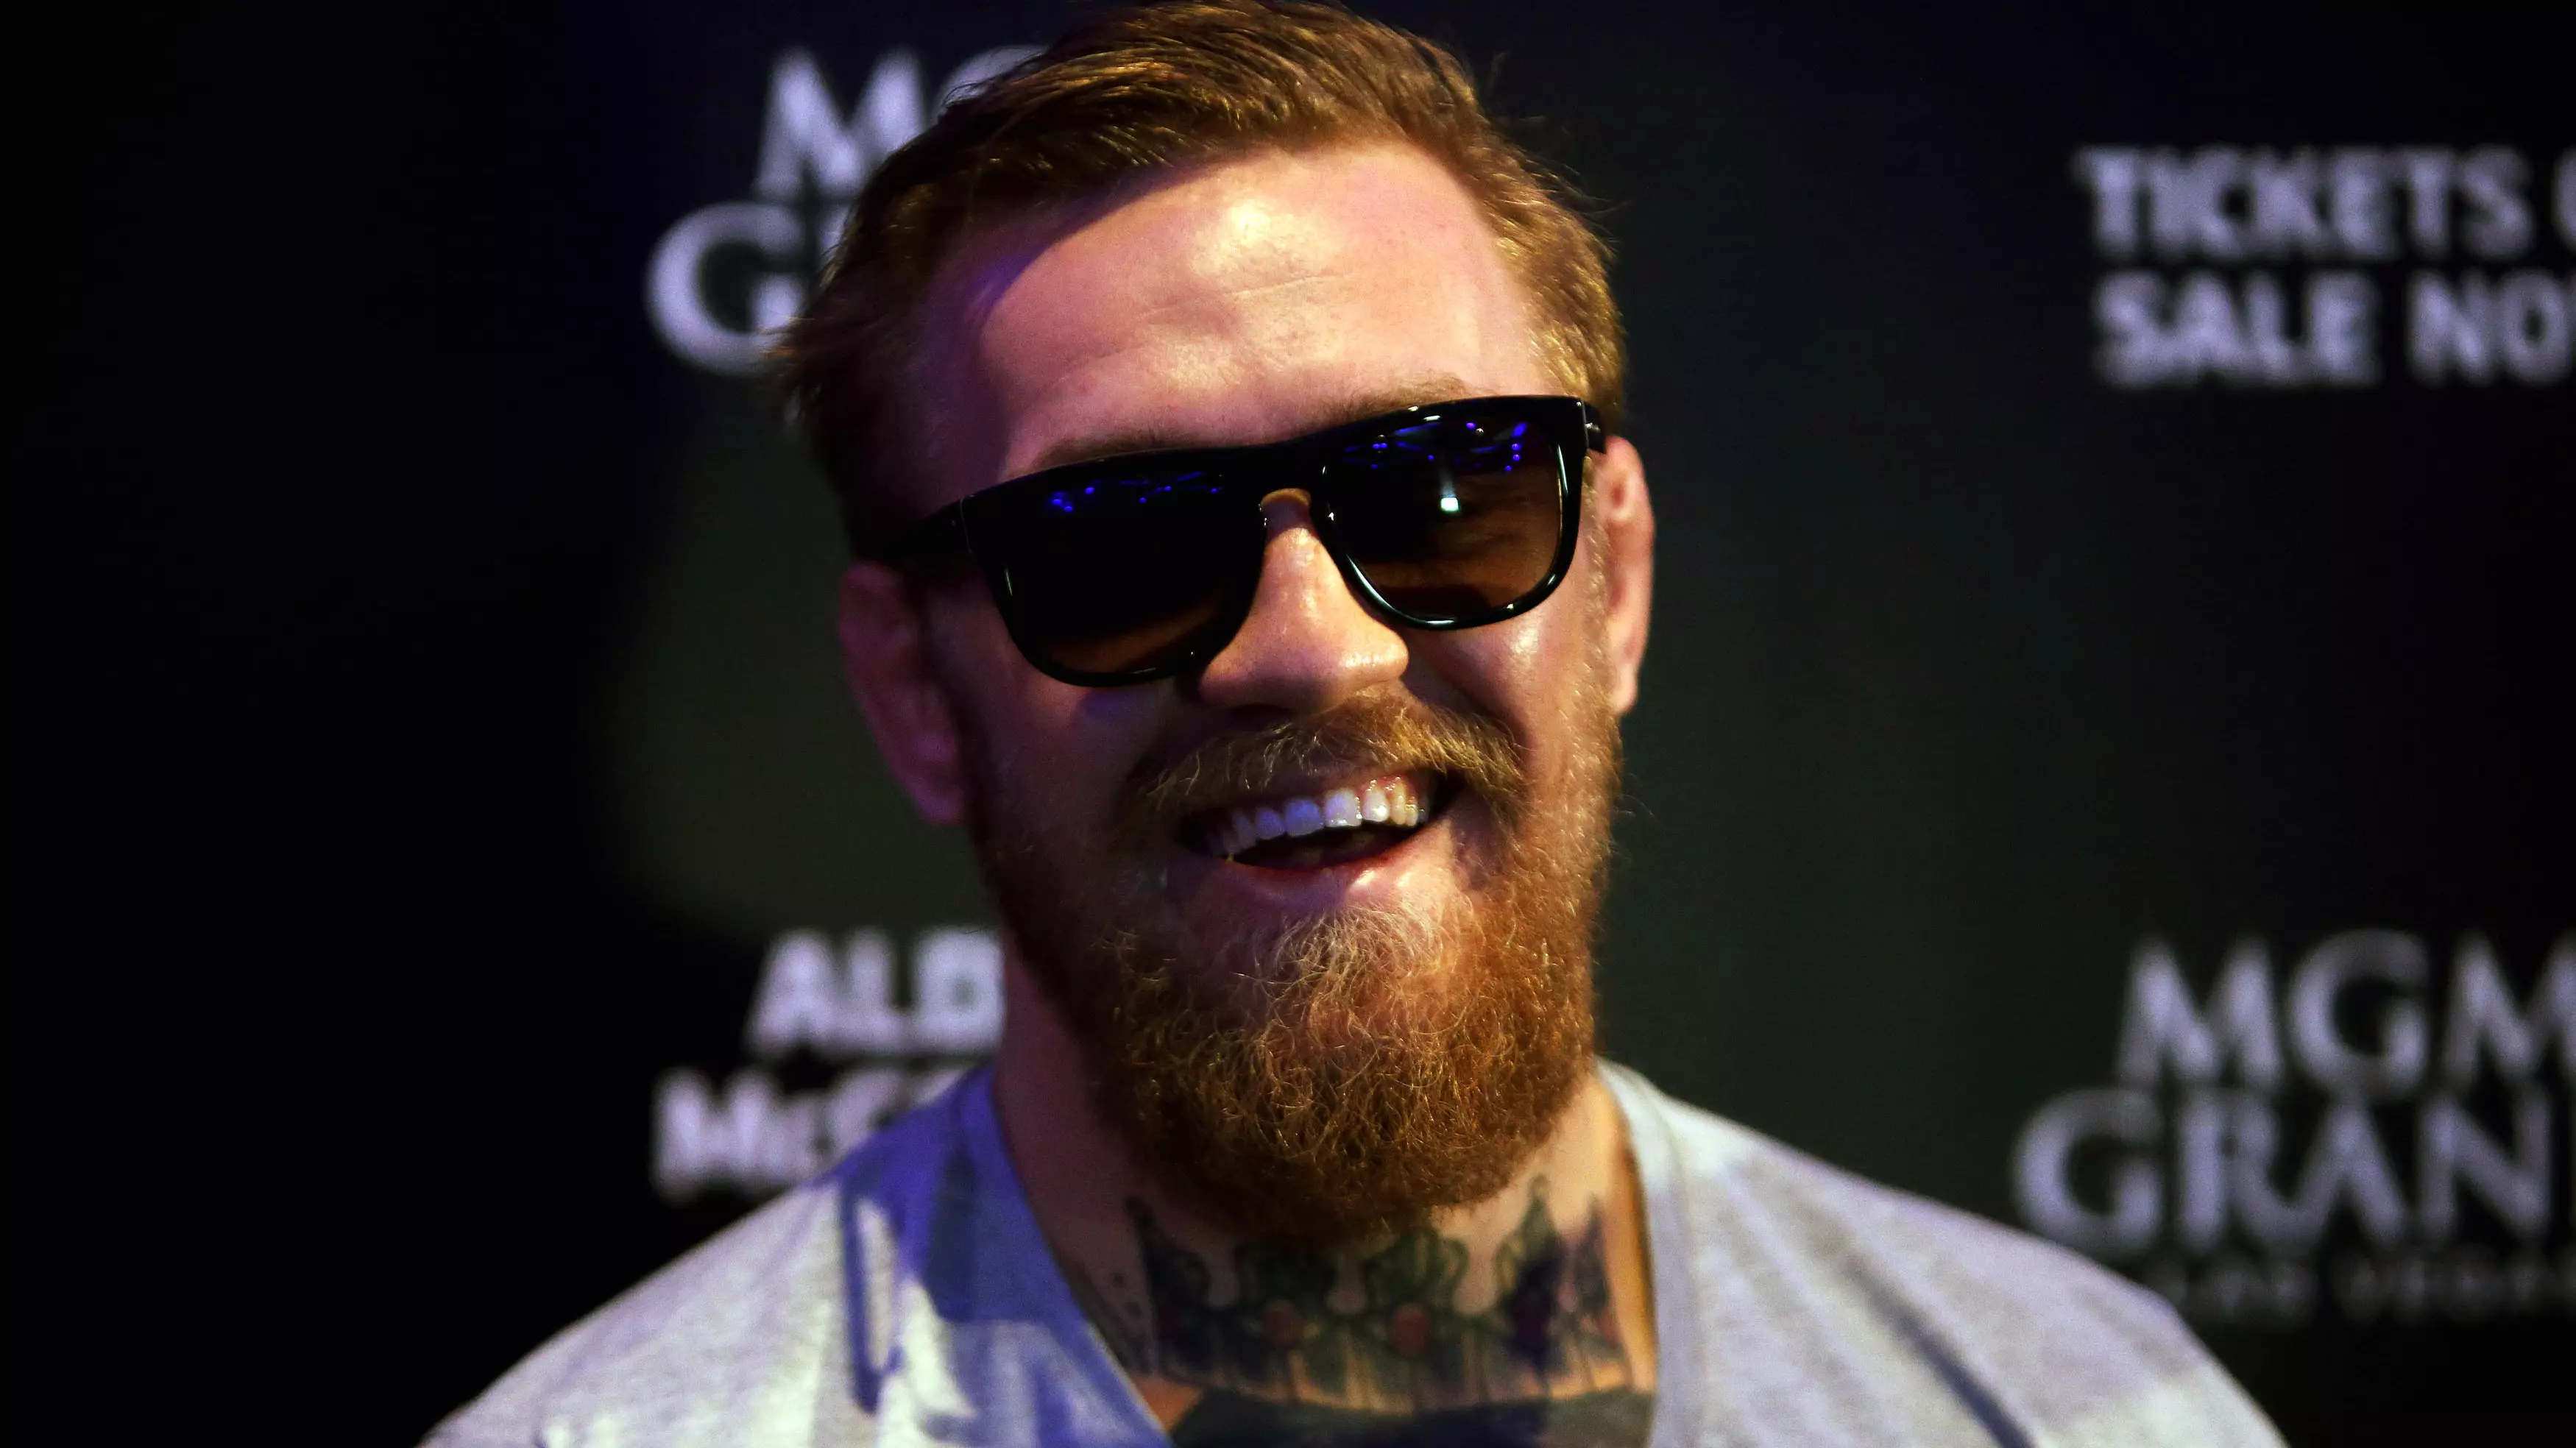 Dana White Reveals Who Conor McGregor Will Fight Next, And It's A Big One